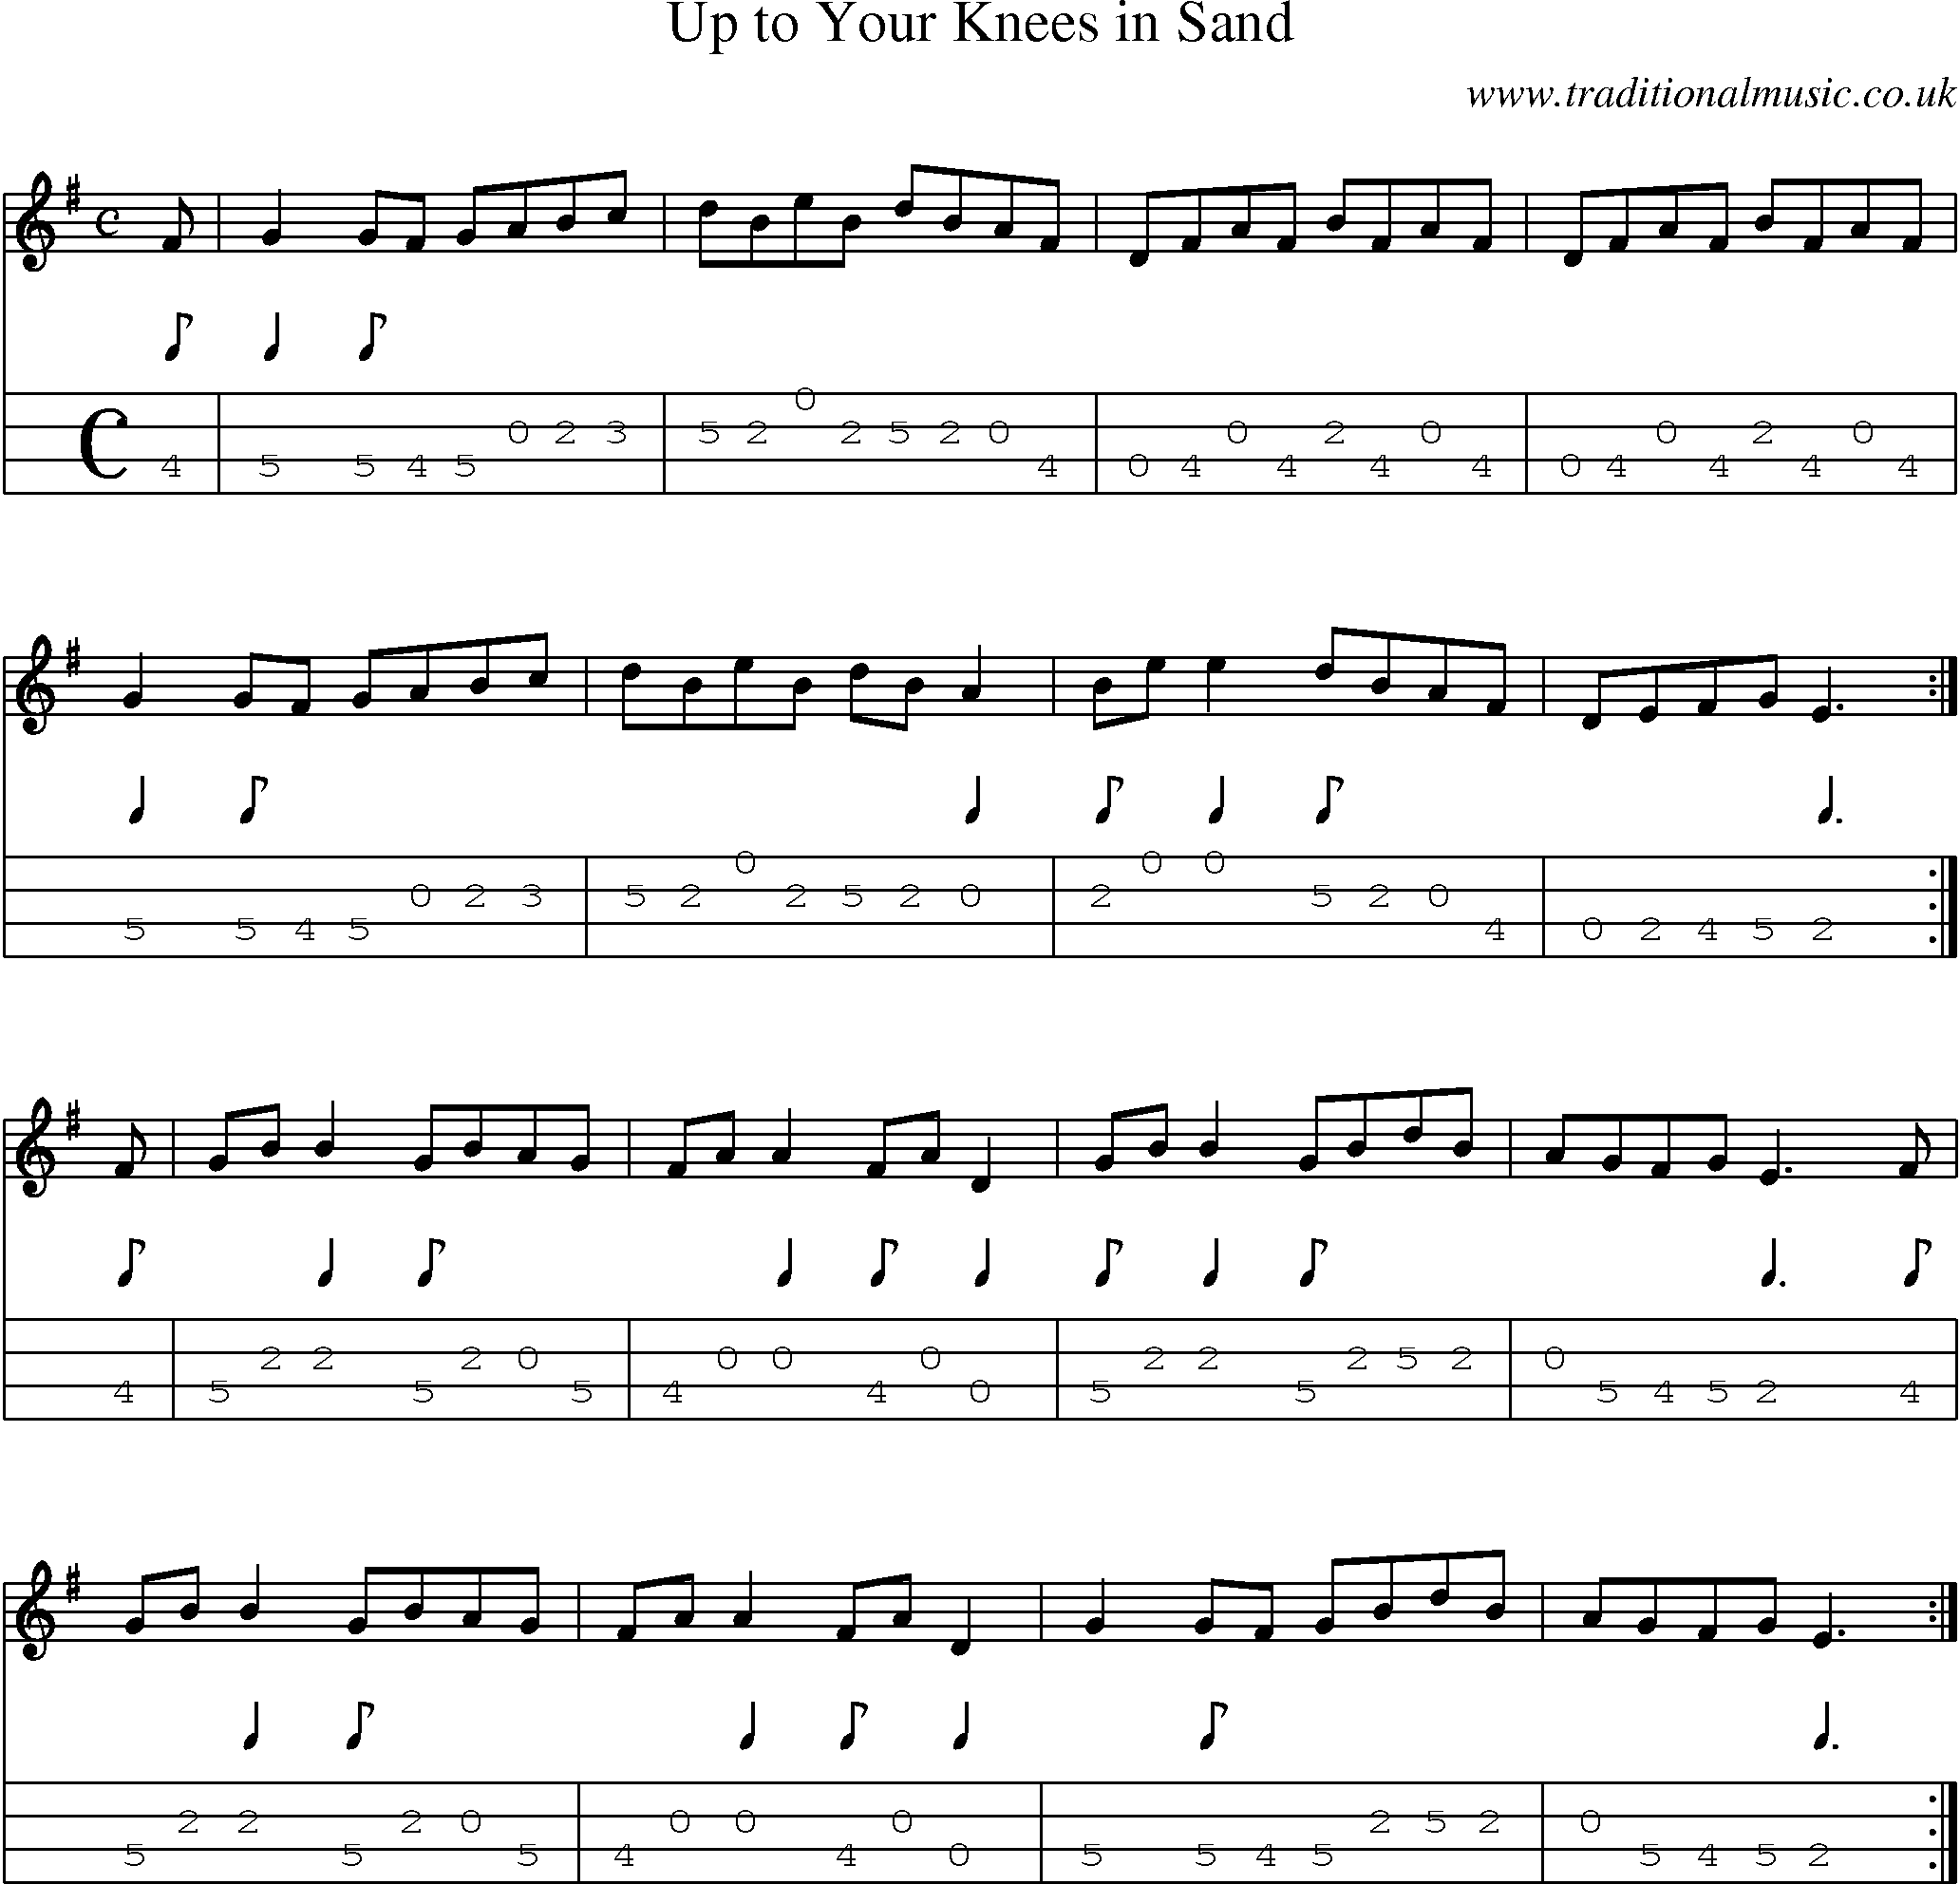 Music Score and Mandolin Tabs for Up To Your Knees In Sand